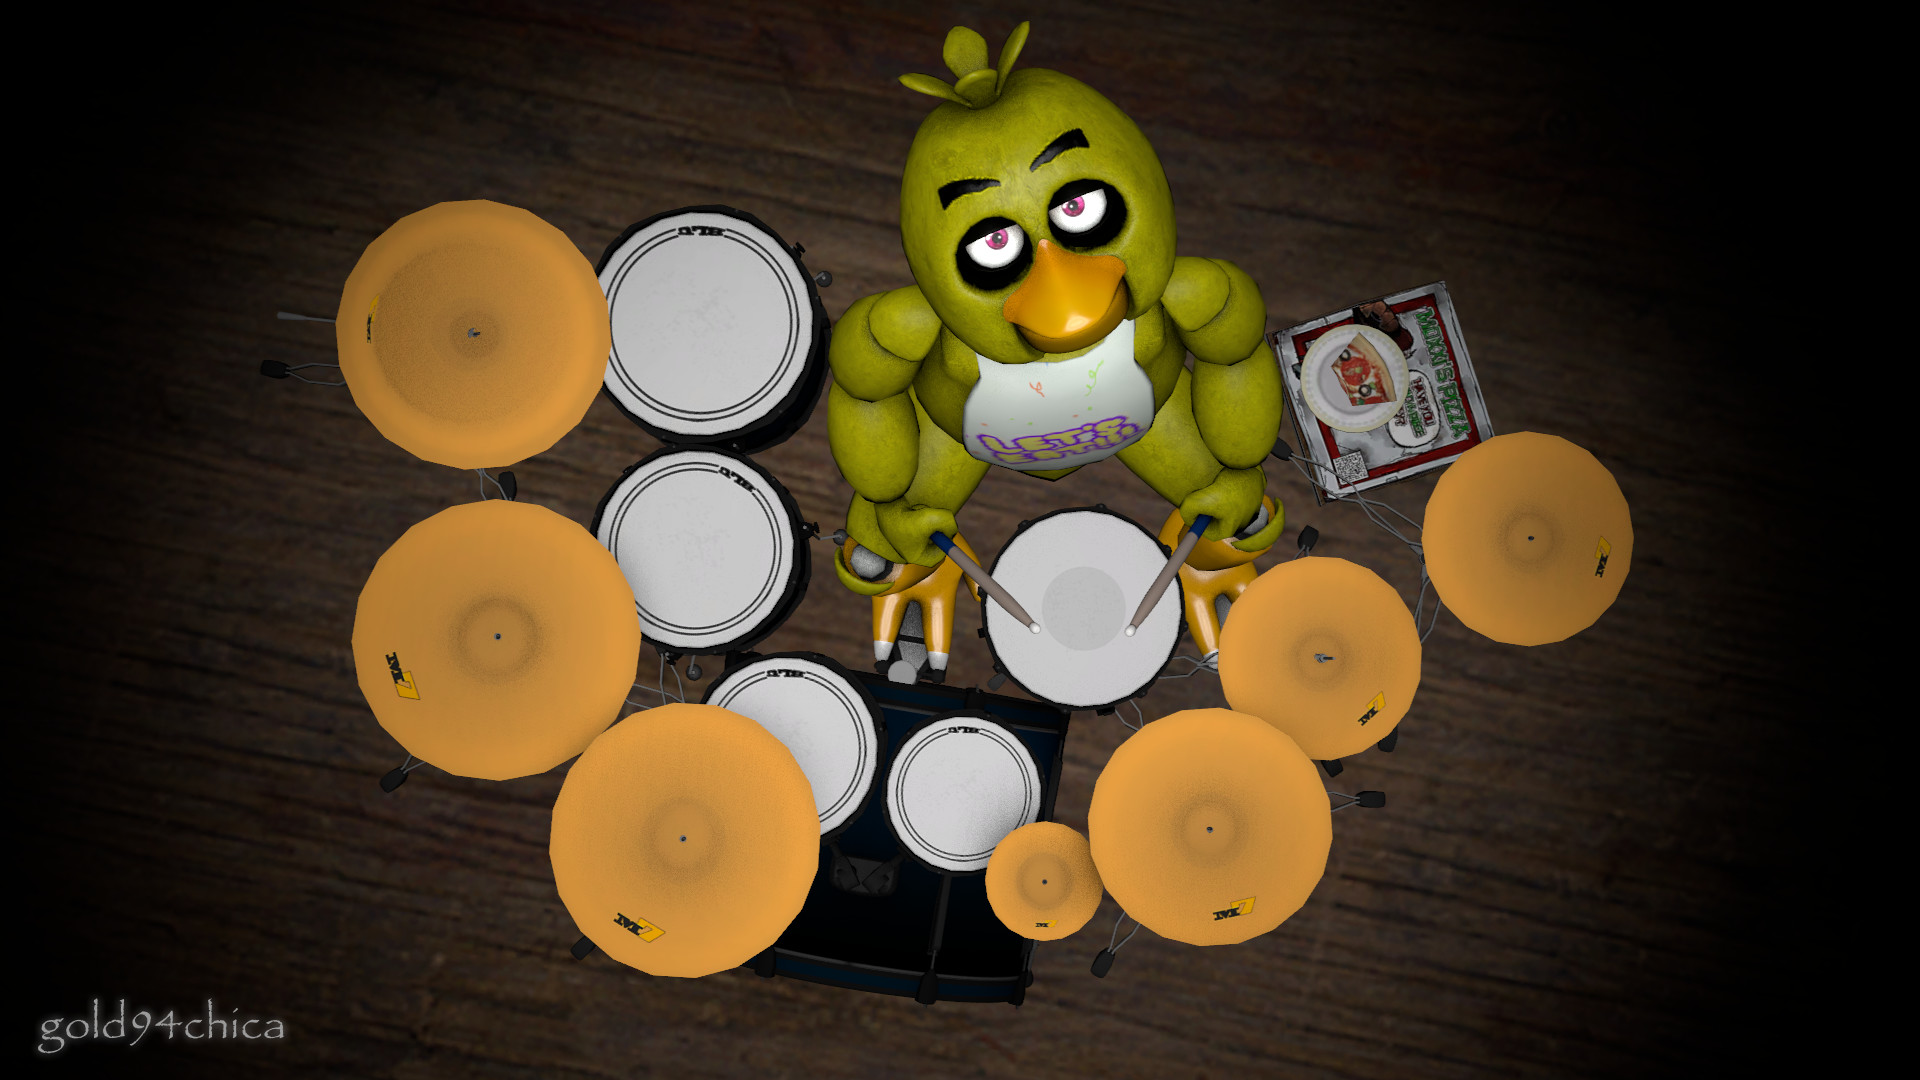 1920x1080 ... Chica's Drumset (SFM Wallpaper) by gold94chica